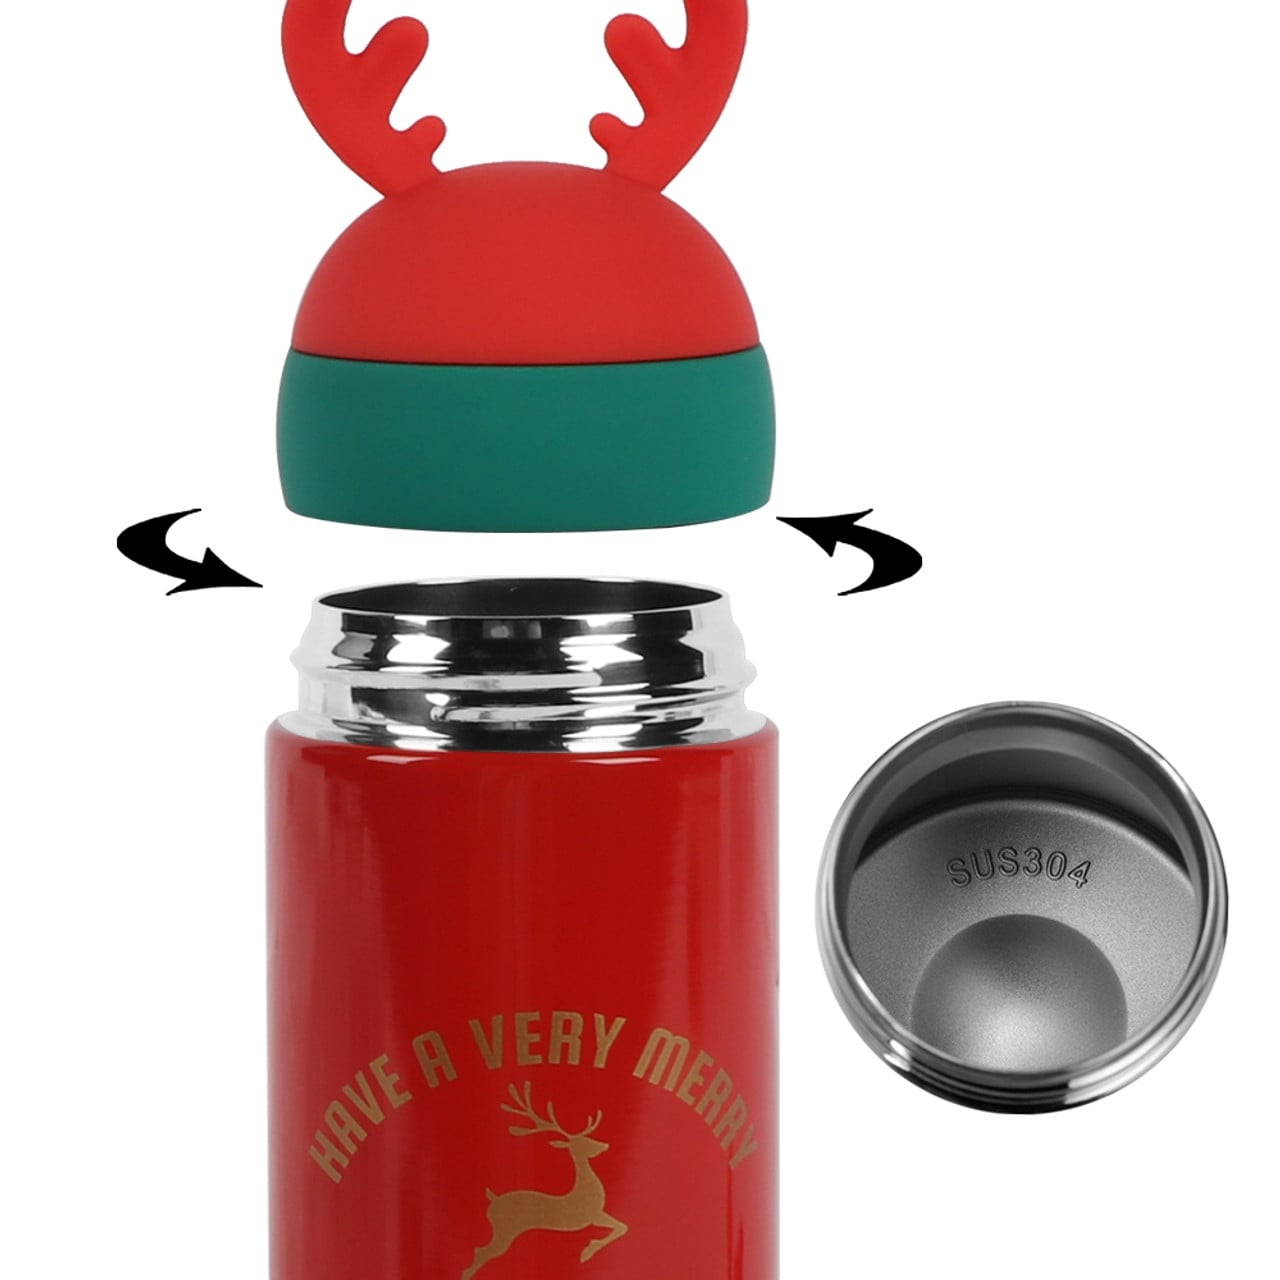 https://ak1.ostkcdn.com/images/products/is/images/direct/b92cc3fdf0e77edd16a6b815d9a50c16b3e9a518/Reindeer-Coffee-Tumbler-Insulated-Metal-Christmas-Thermos-Cup-Hot-Cold-Screw-Lid.jpg